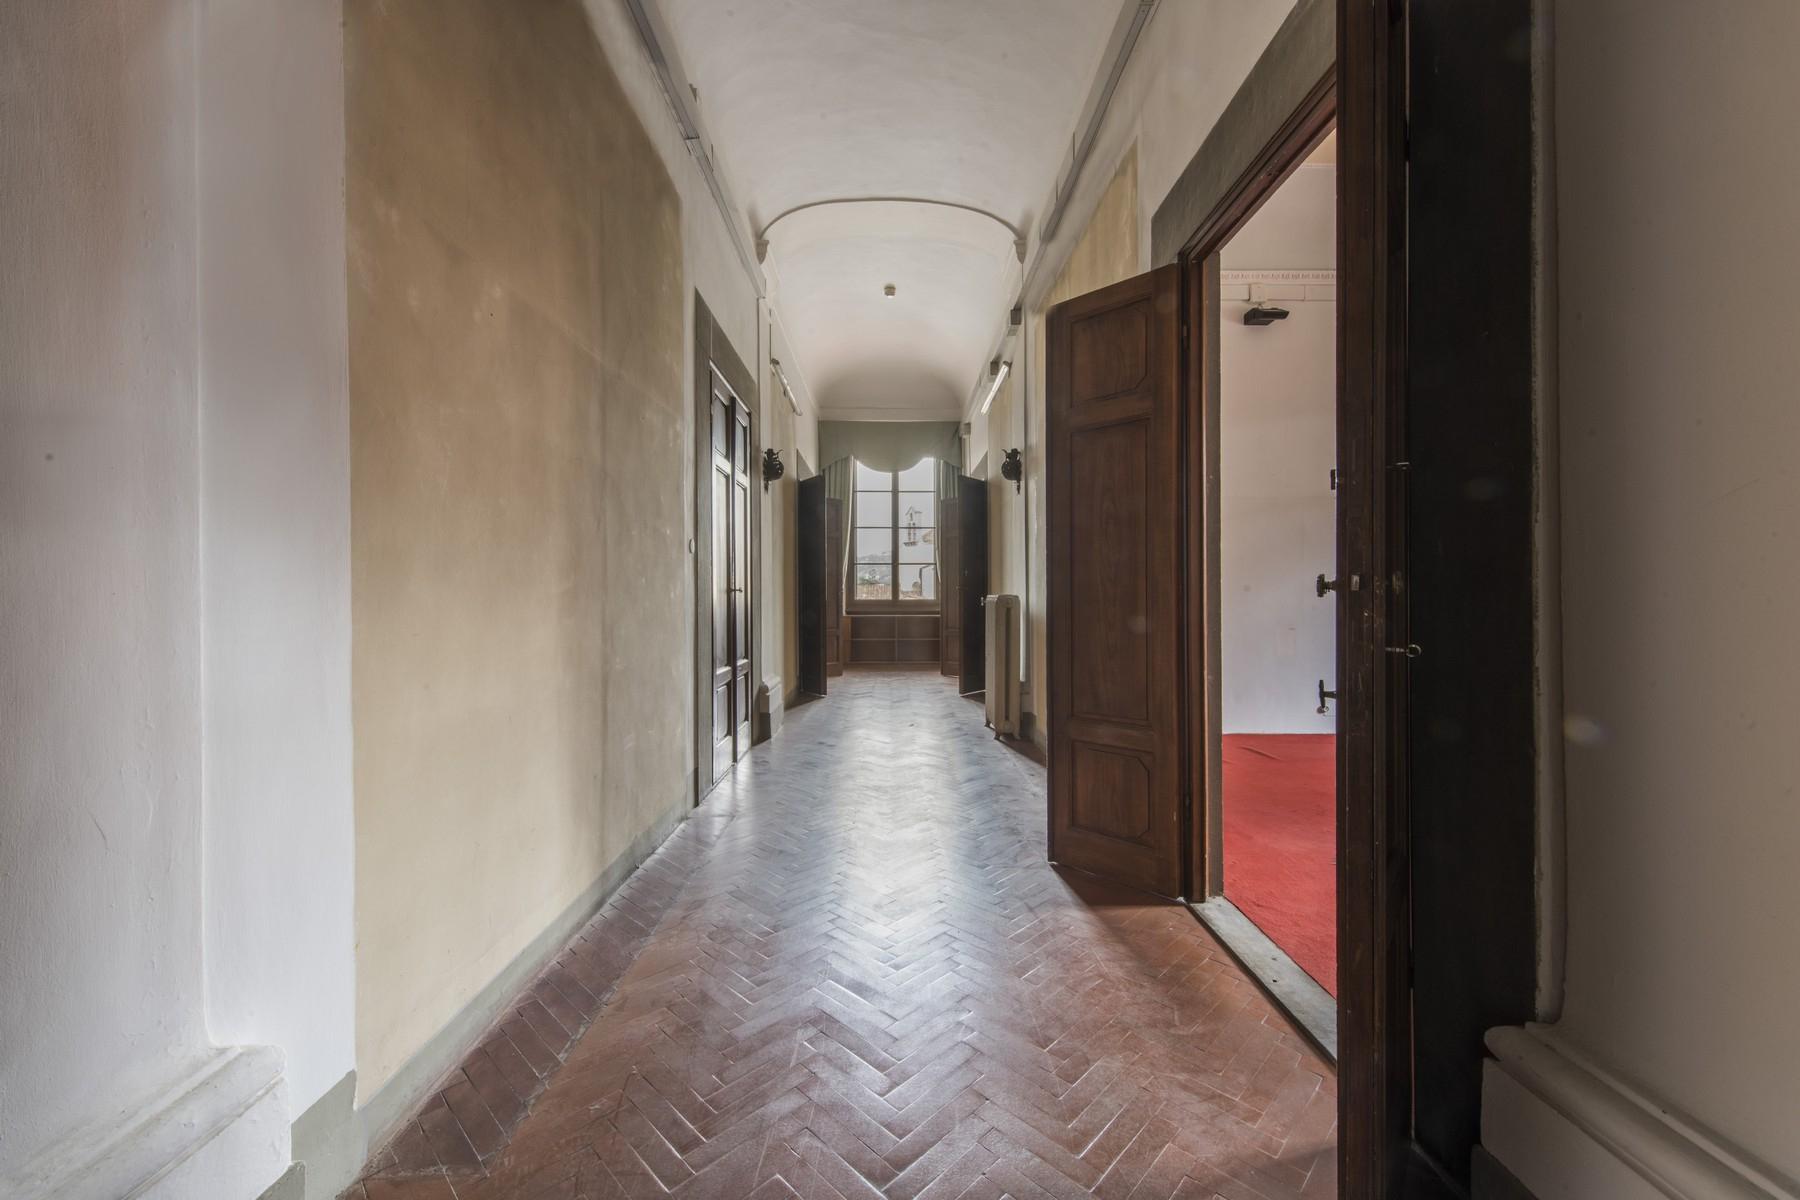 Magnificent 520sqm penthouse in a historic palazzo. - 18